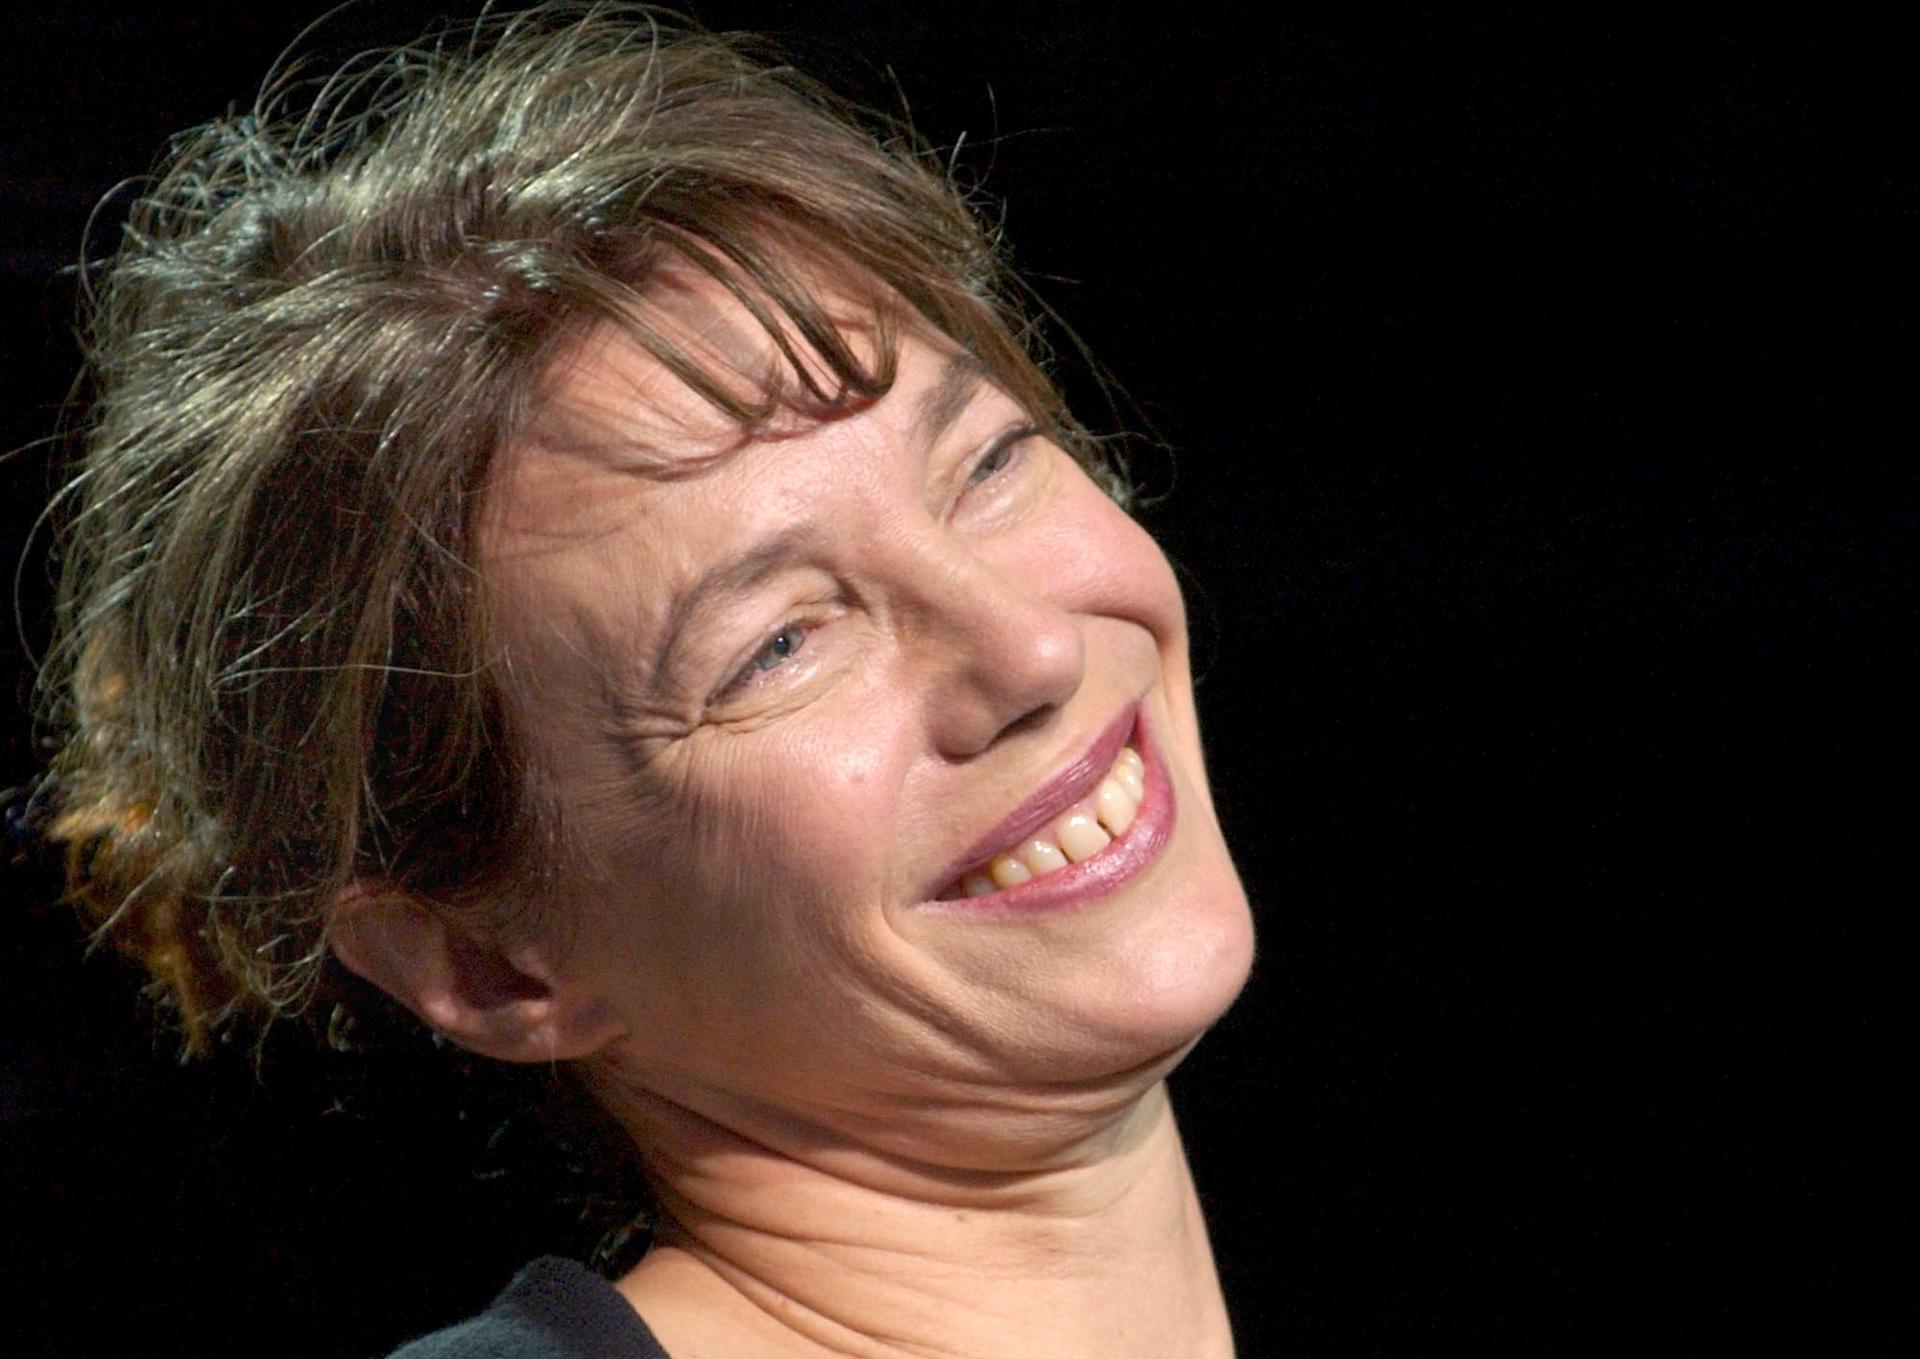 Nyon (Switzerland), 24/06/2003.- British actress and singer Jane Birkin performs at the Paleo Festival in Nyon, Switzerland, 24 June 2003 (re-issued 16 July 2023). Jane Birkin was found dead at her home in Paris on 16 July 2023. (Suiza) EFE/EPA/SANDRO CAMPARDO NO ARCHIVES
